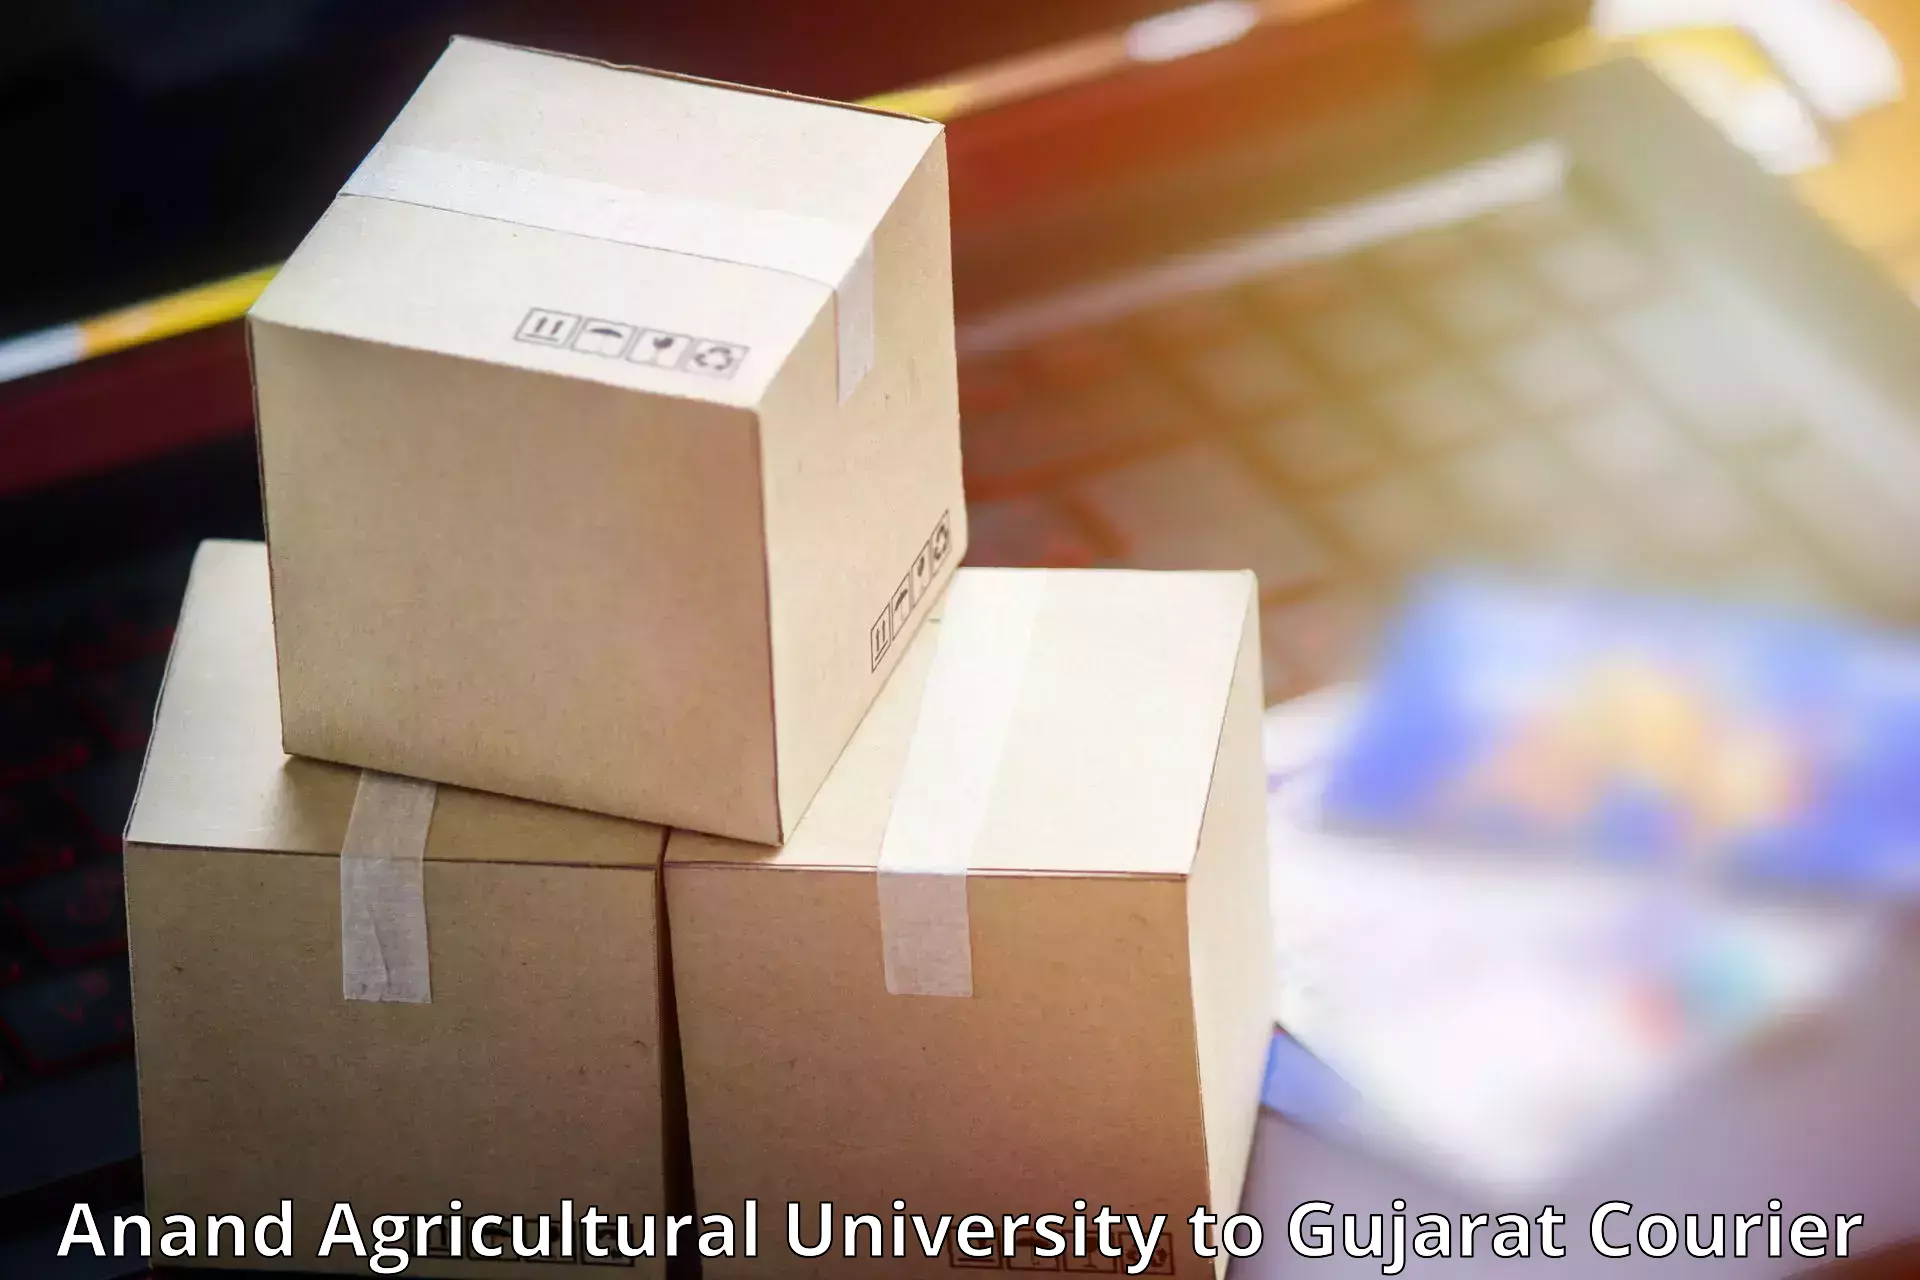 Premium courier services Anand Agricultural University to Mahemdavad